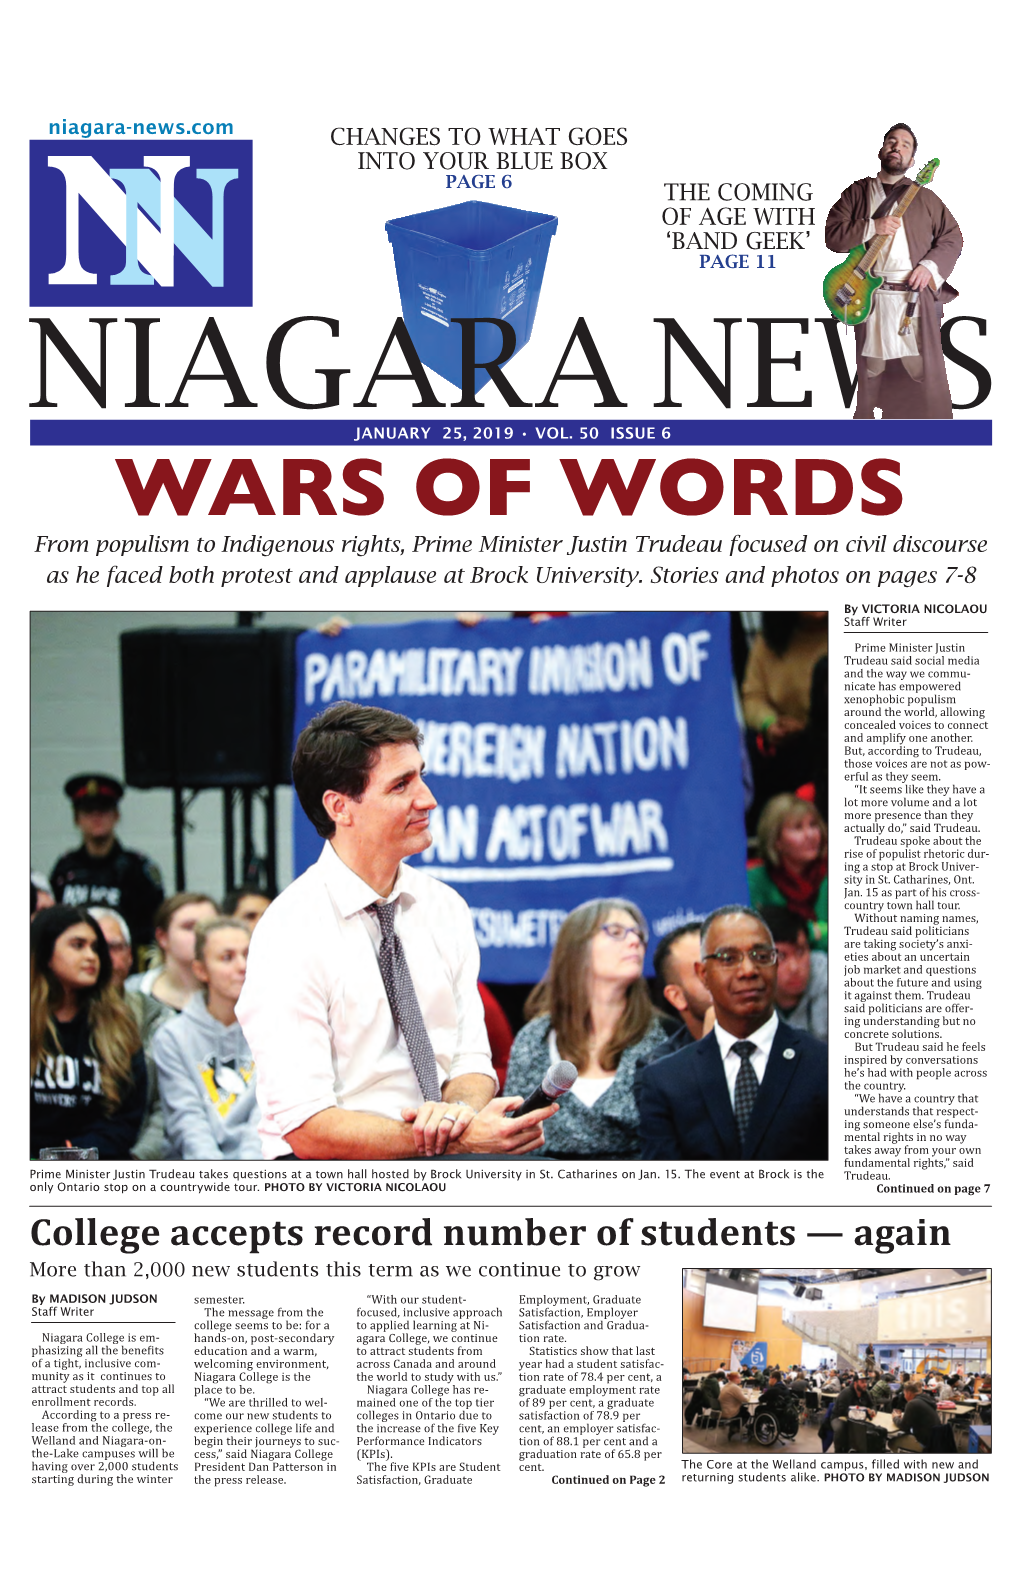 WARS of WORDS from Populism to Indigenous Rights, Prime Minister Justin Trudeau Focused on Civil Discourse As He Faced Both Protest and Applause at Brock University